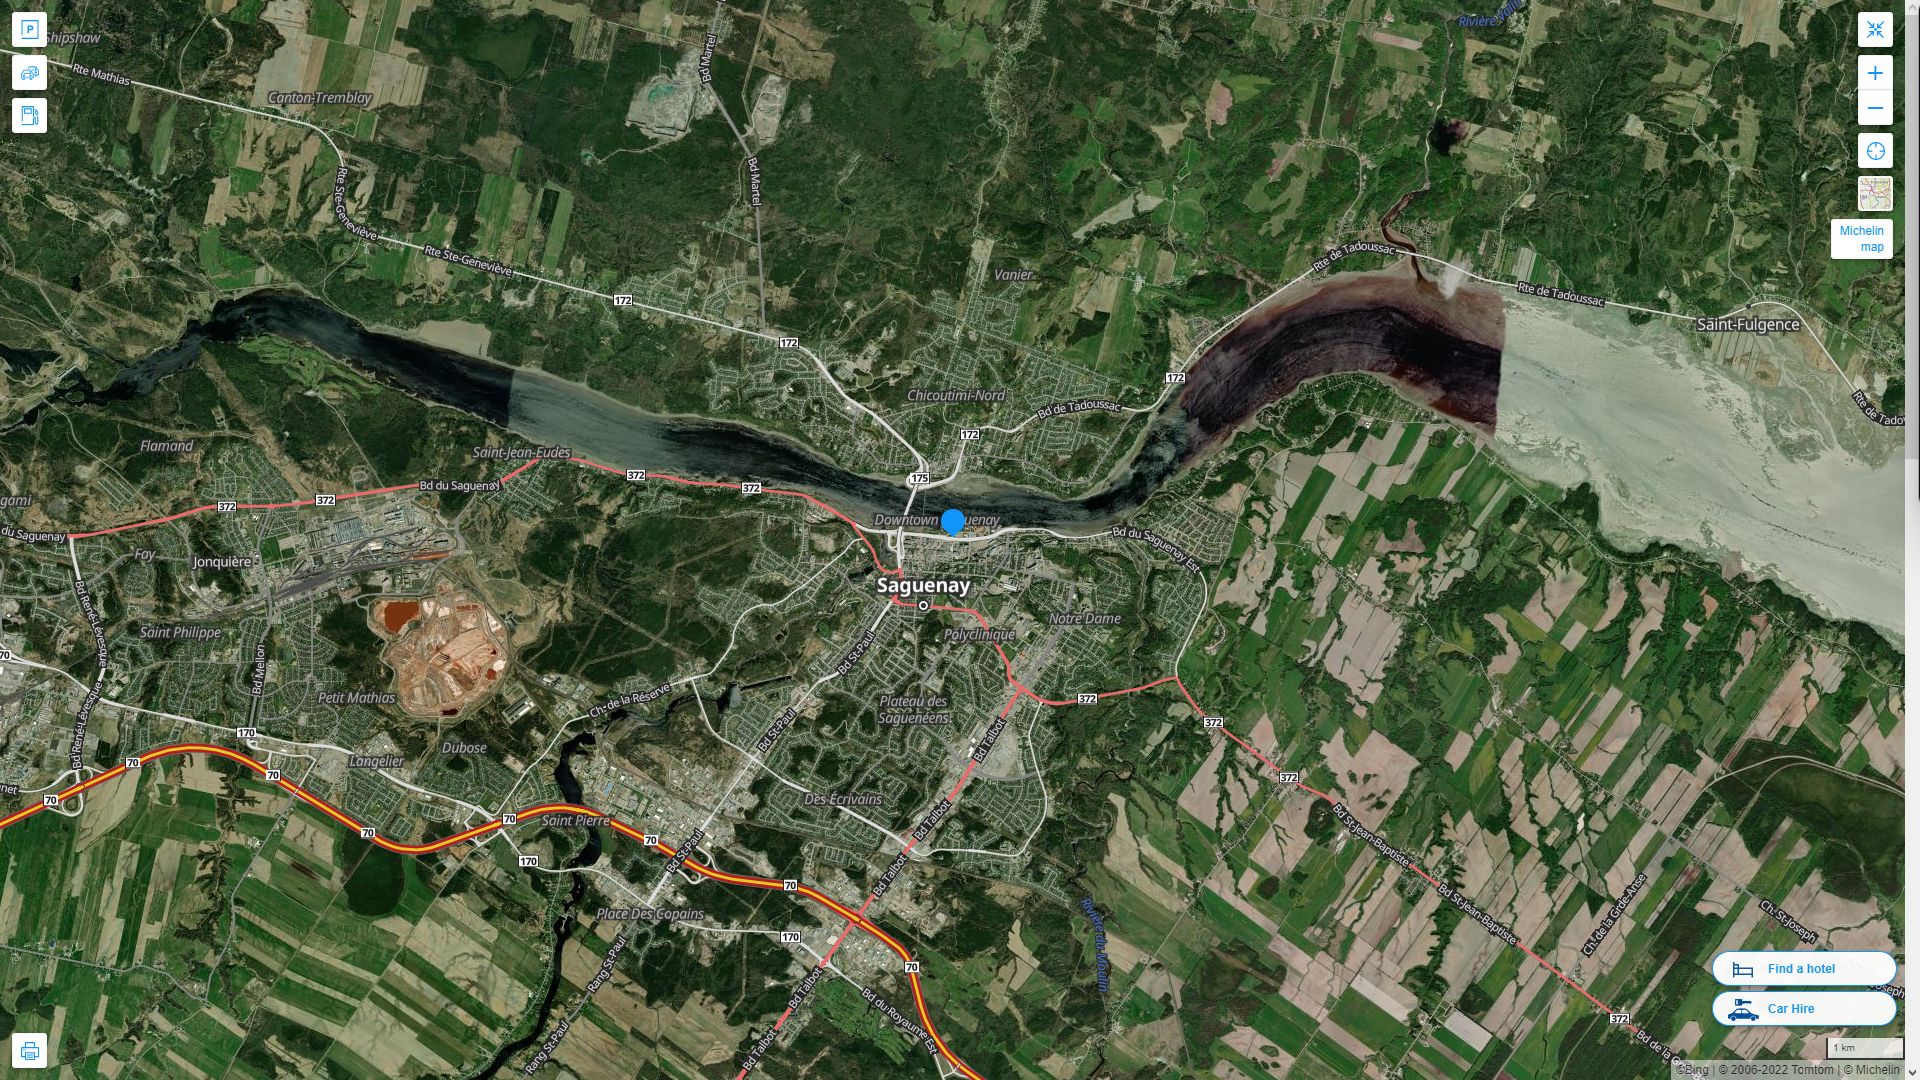 Chicoutimi Jonquiere Highway and Road Map with Satellite View